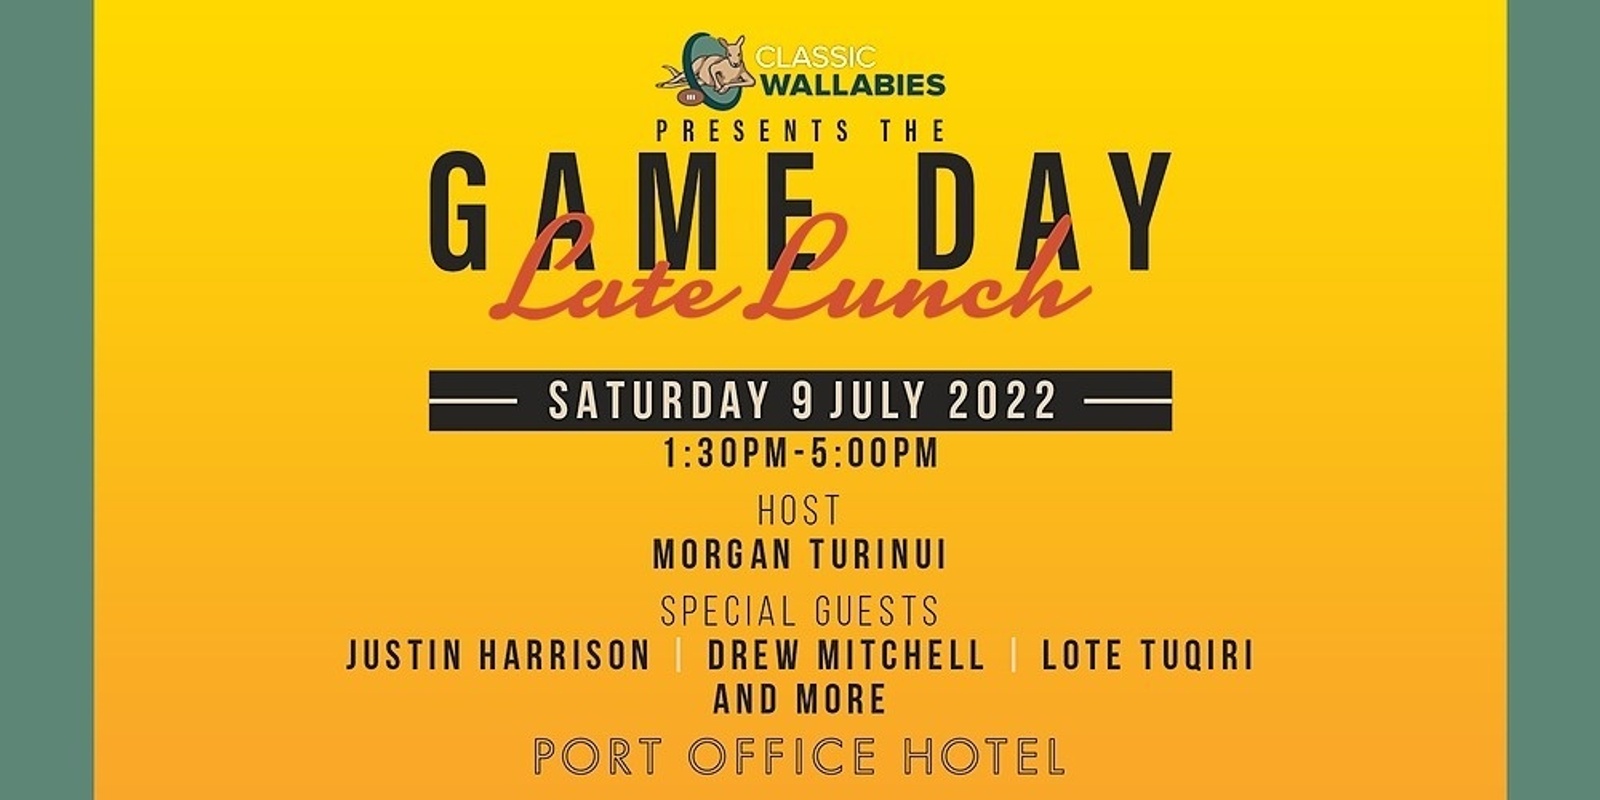 Banner image for Classic Wallabies Game Day Late Lunch